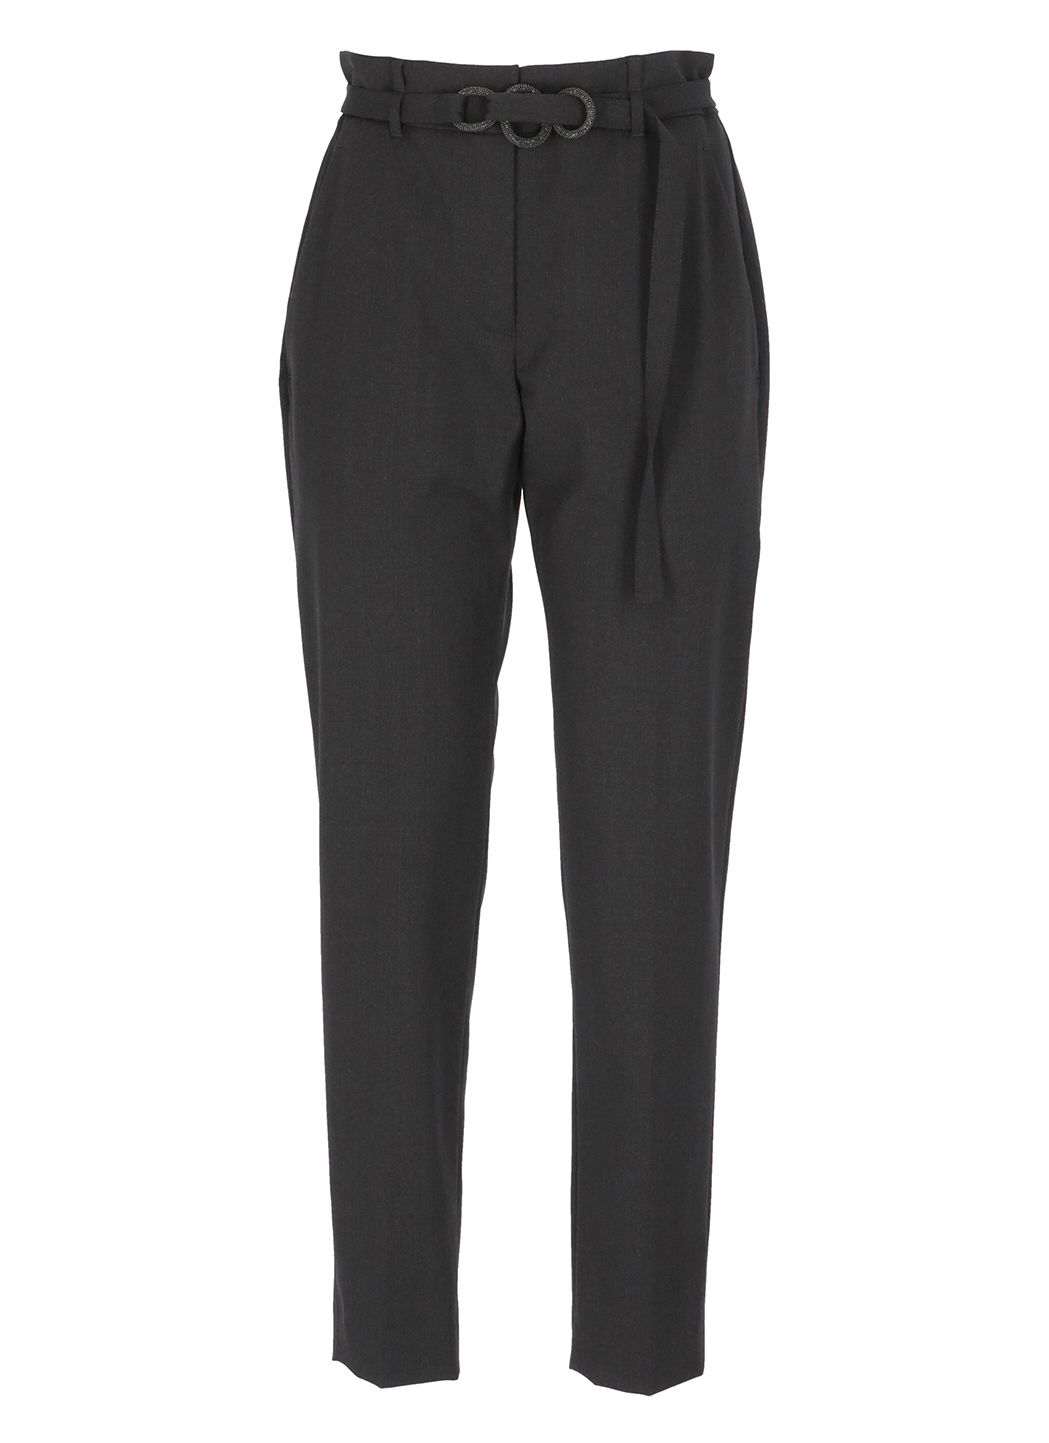 Wool trousers with point of light details